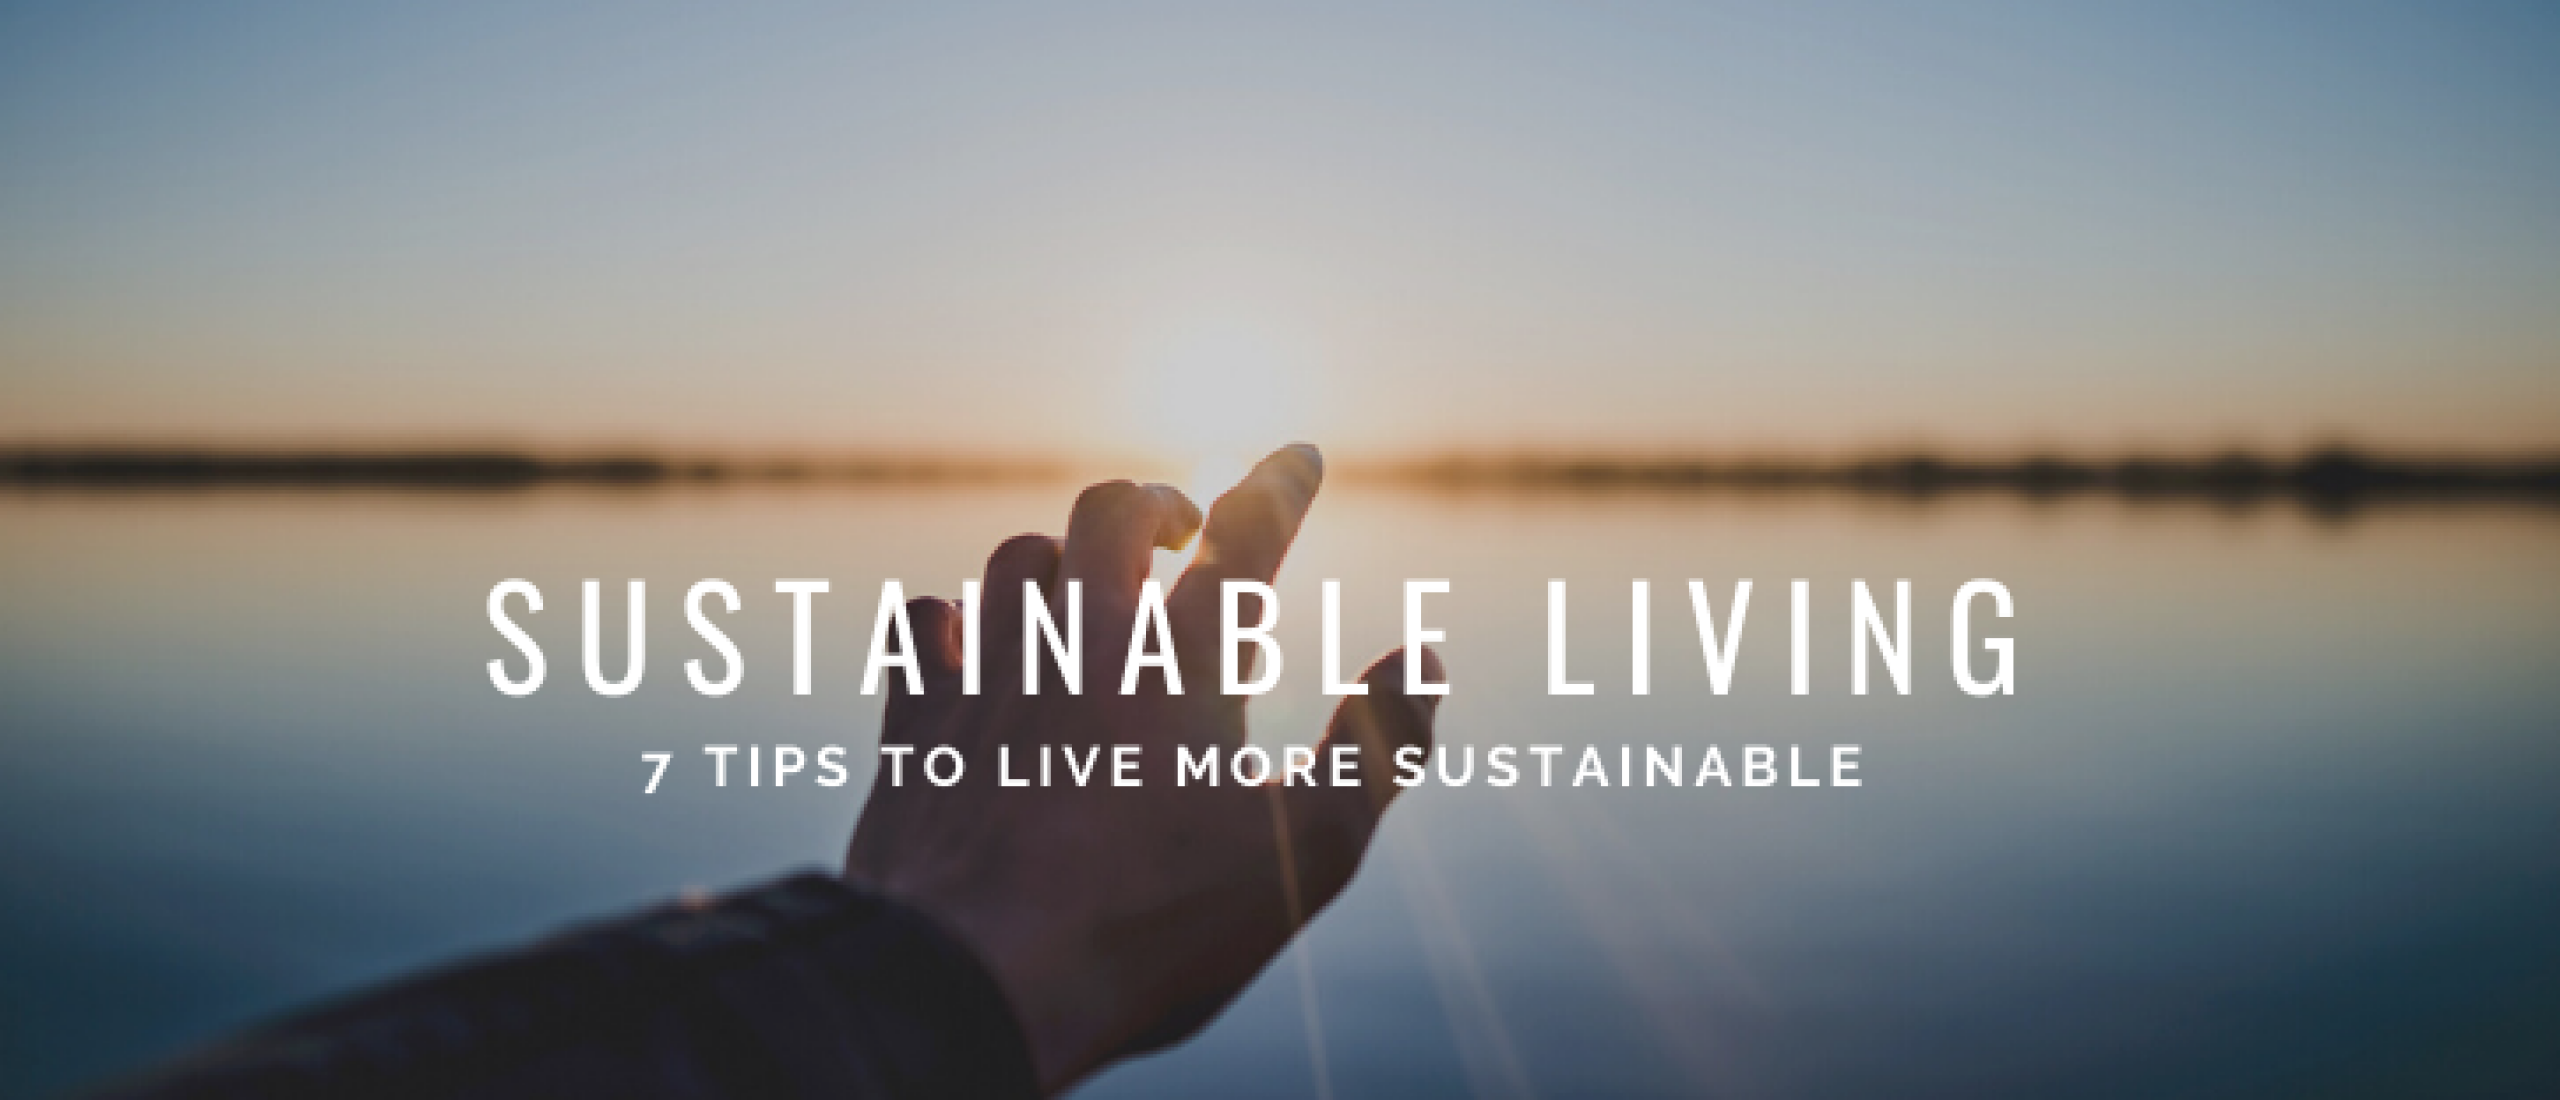 7 Tips for Sustainable Living: Grow Nature and Life